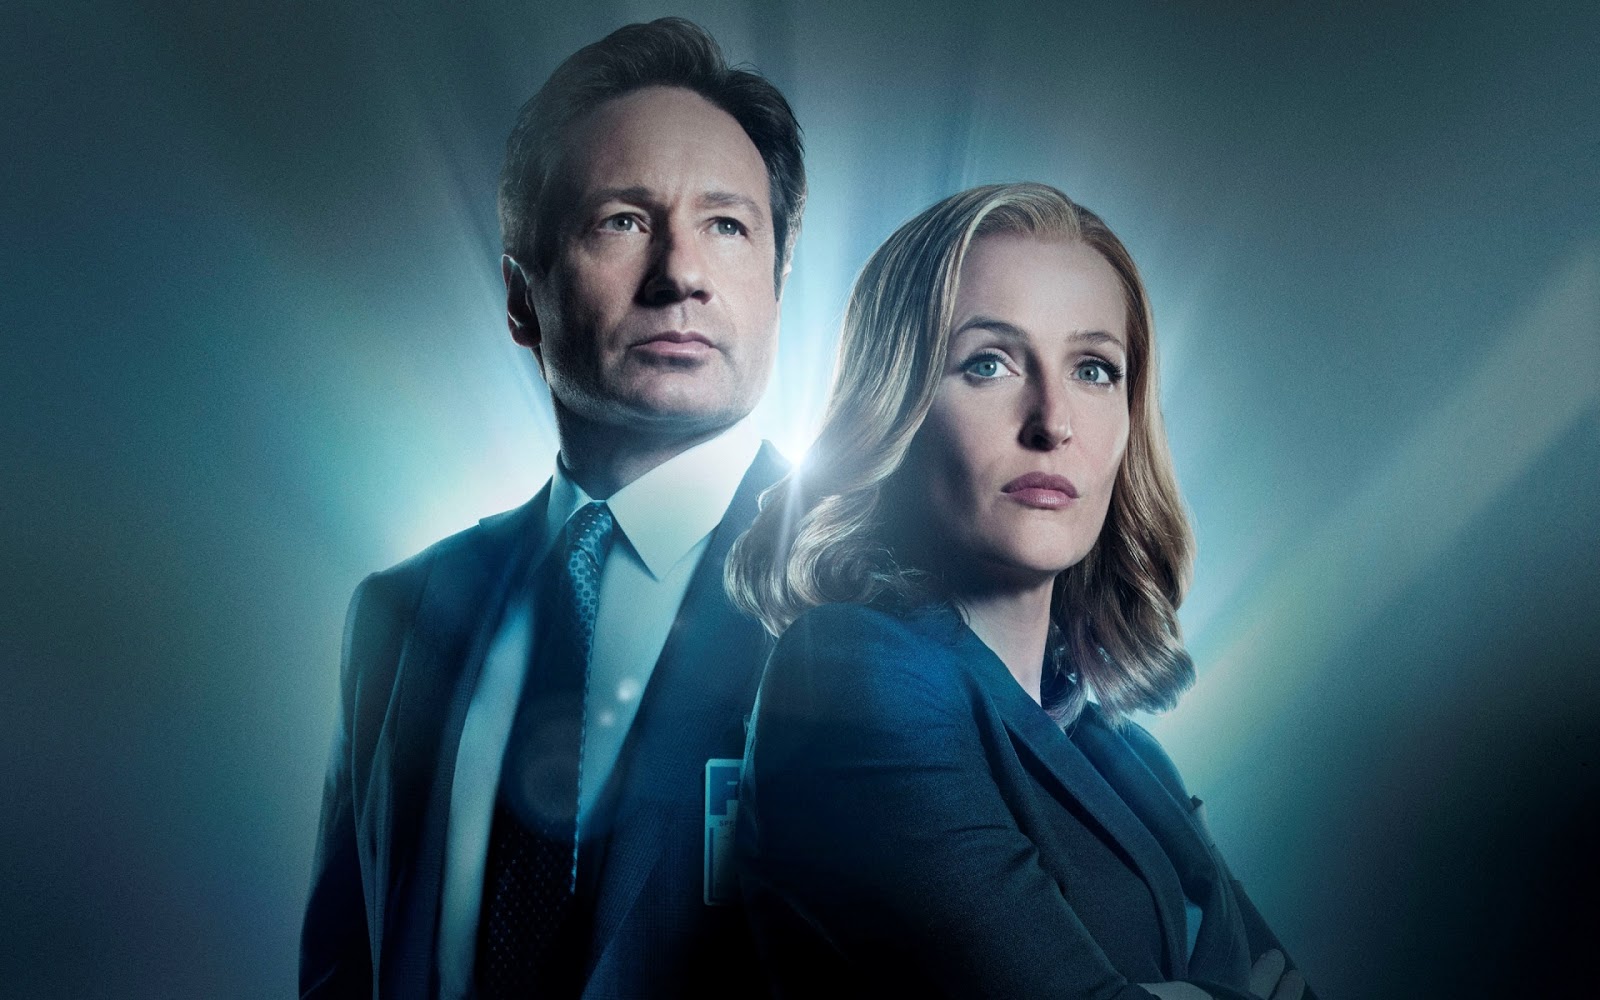 The X-Files 2016 Tv Series Wallpaper | WallpaperMuch - HD Wallpapers